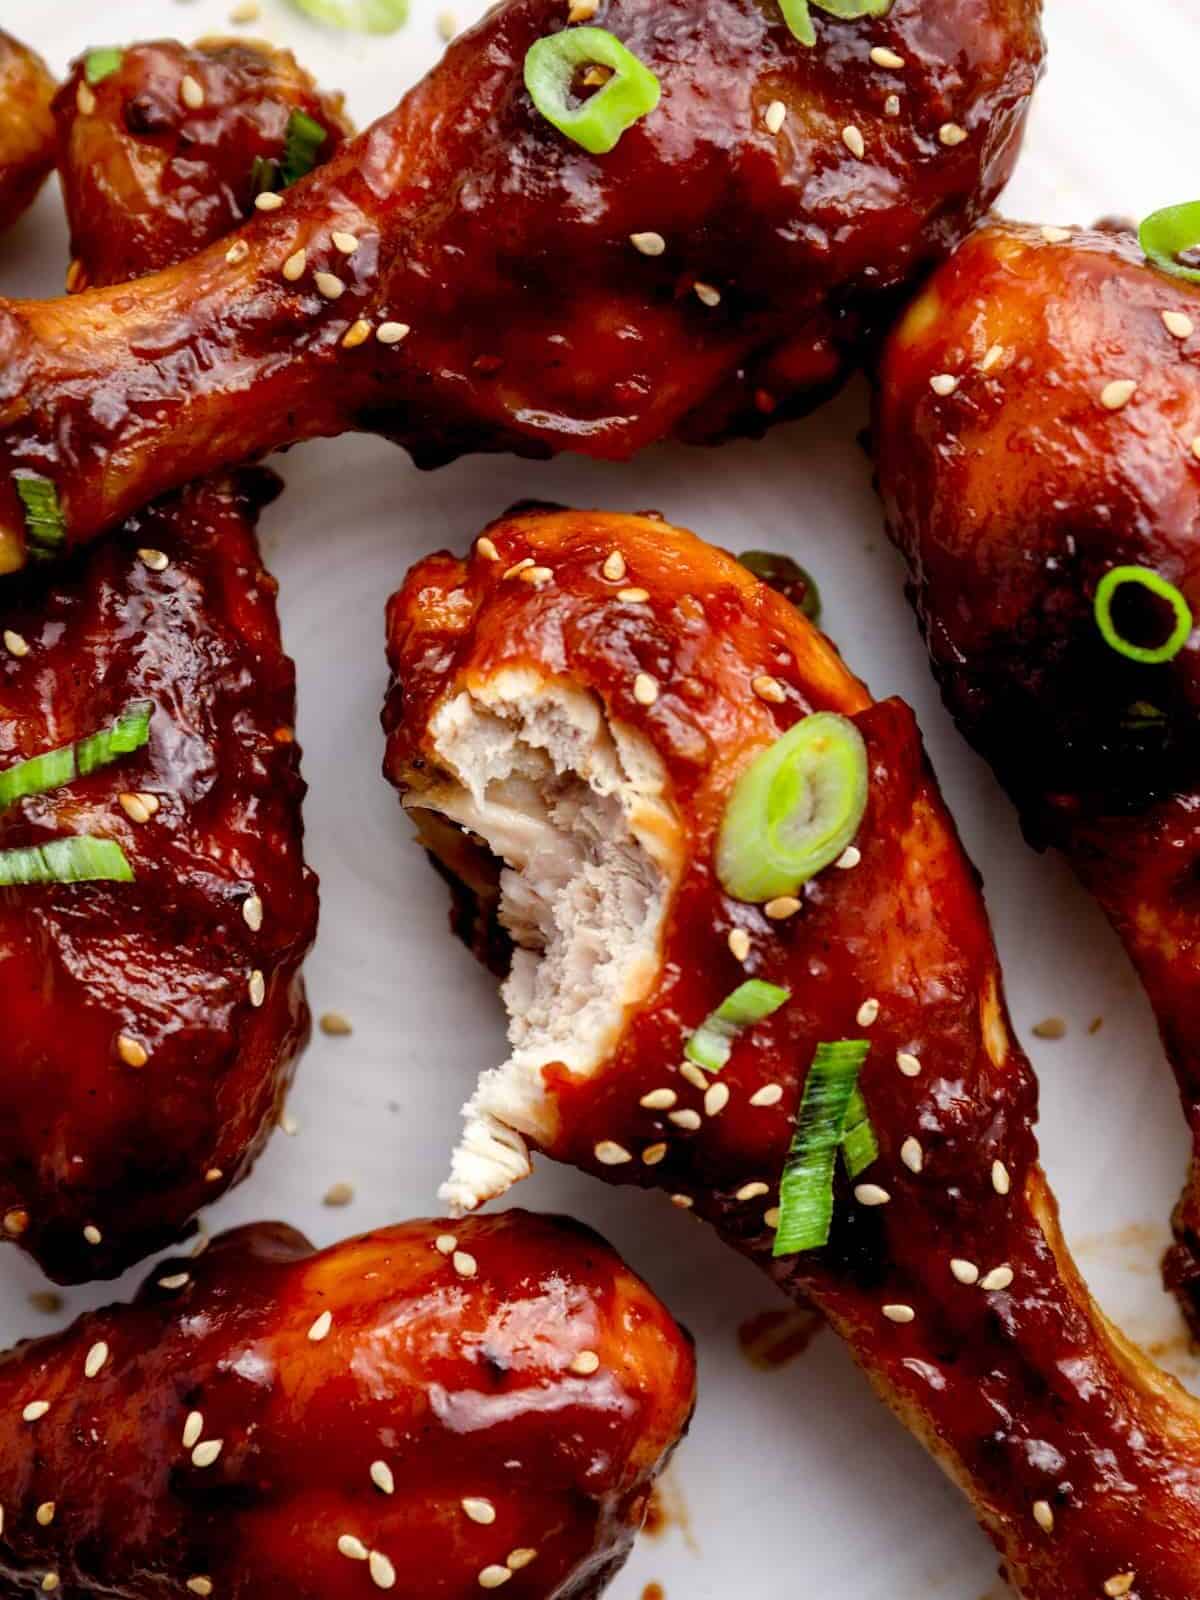 baked teriyaki chicken drumsticks, one has a bite taken out.